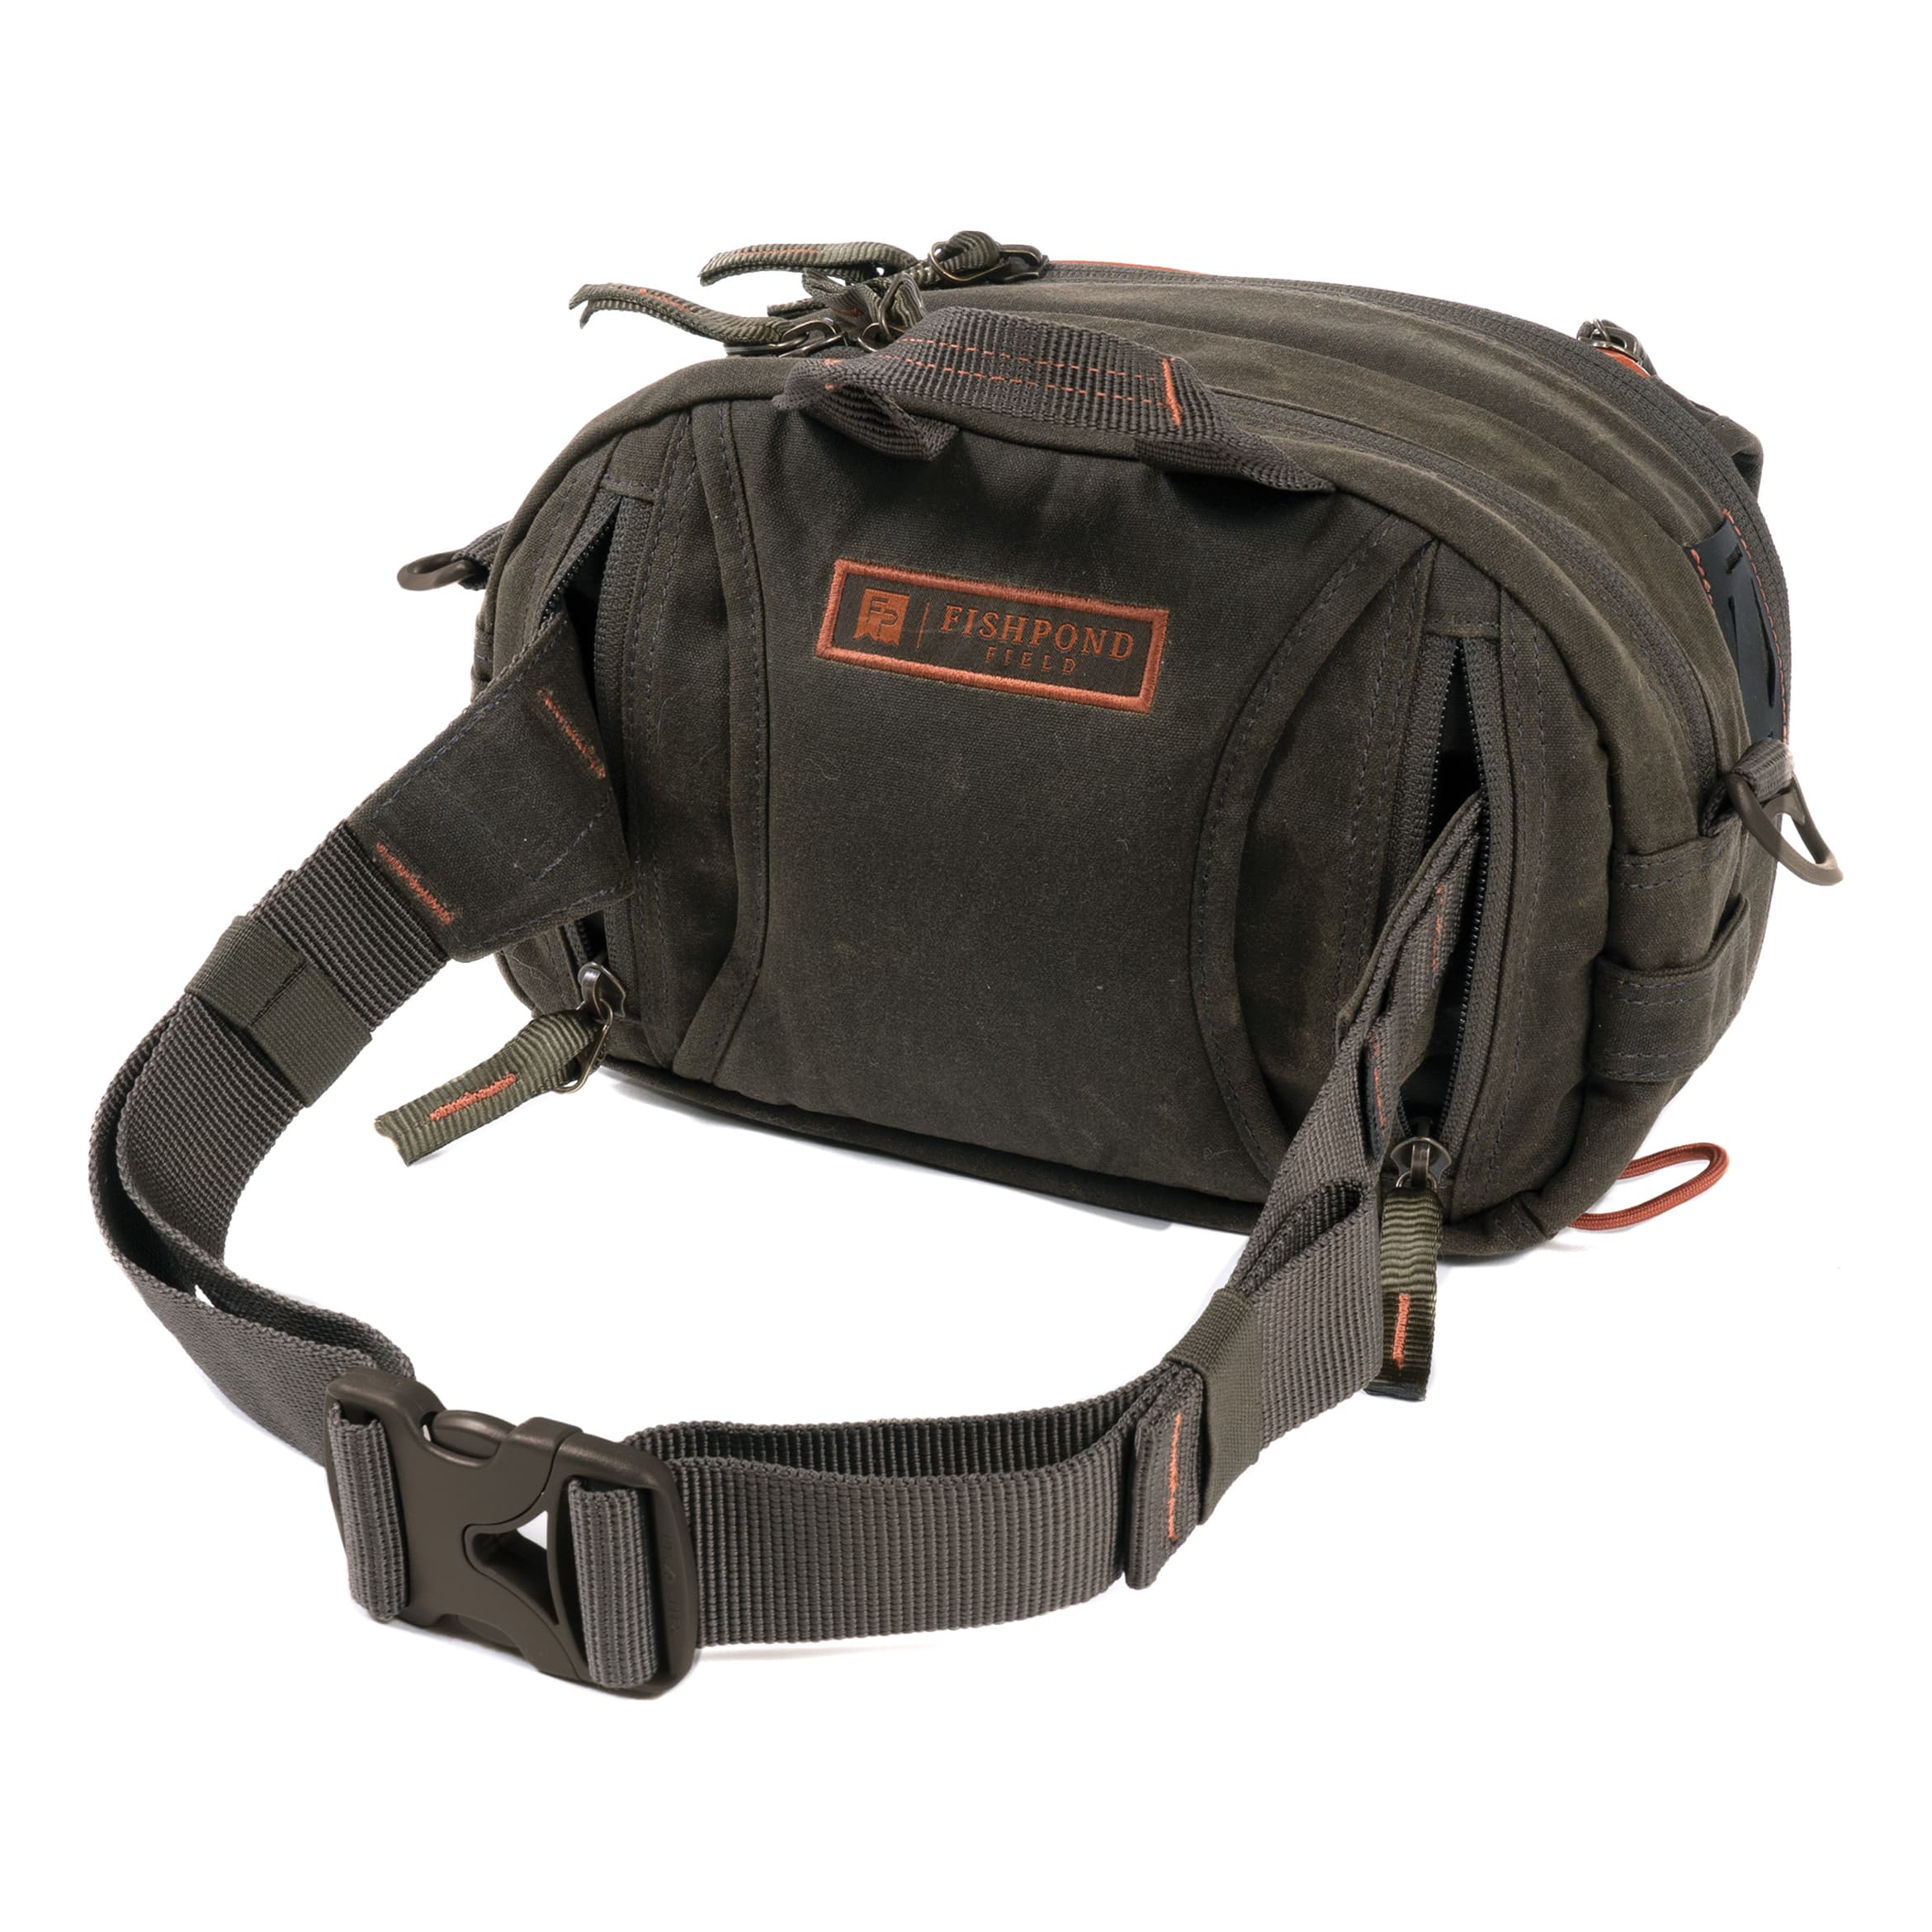 Fishpond® Blue Rive Chest Pack